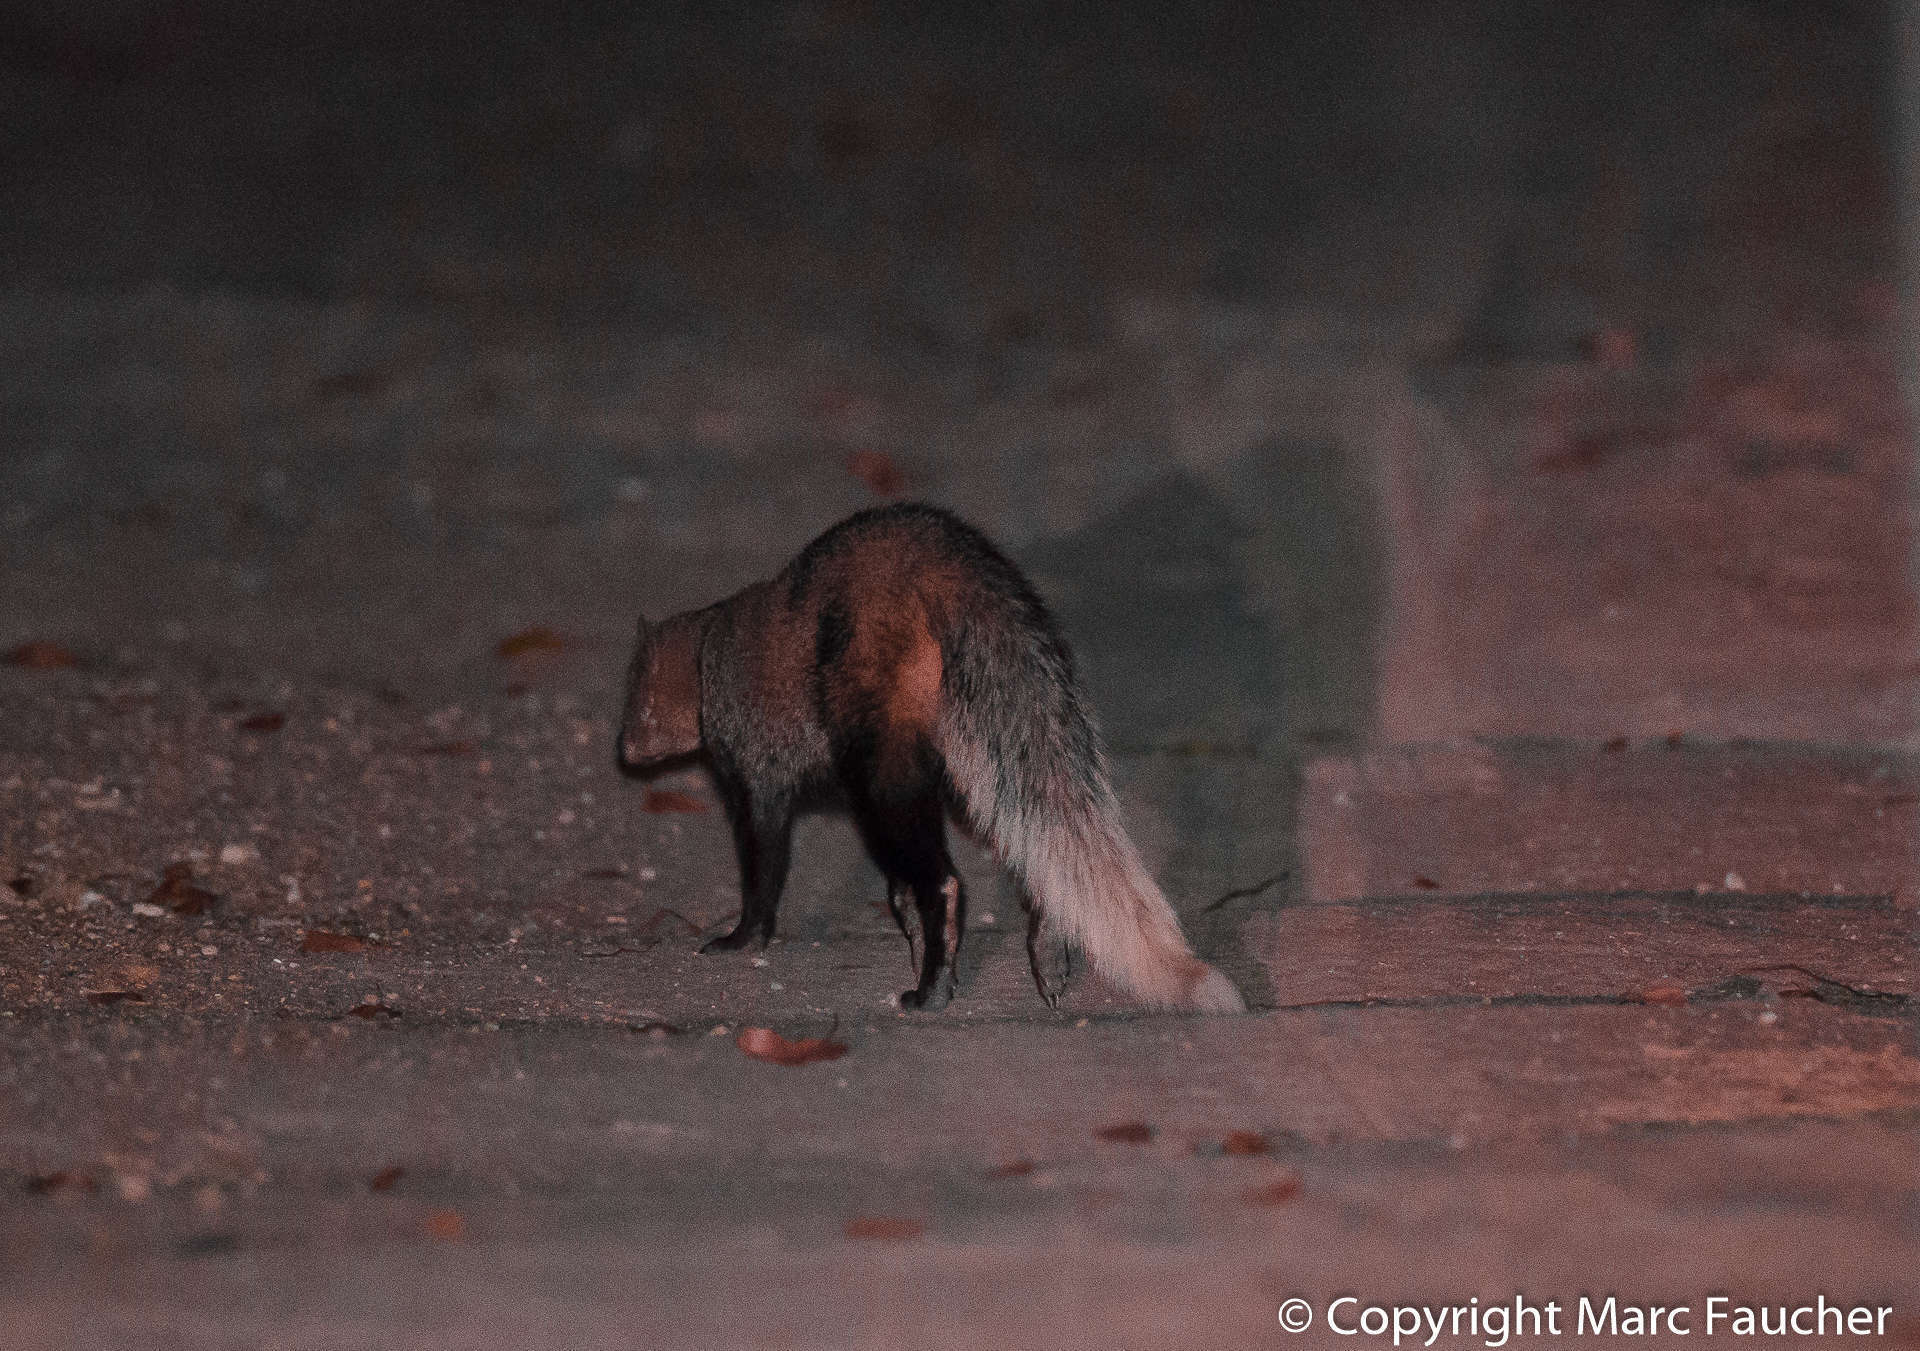 Image of White-tailed Mongoose